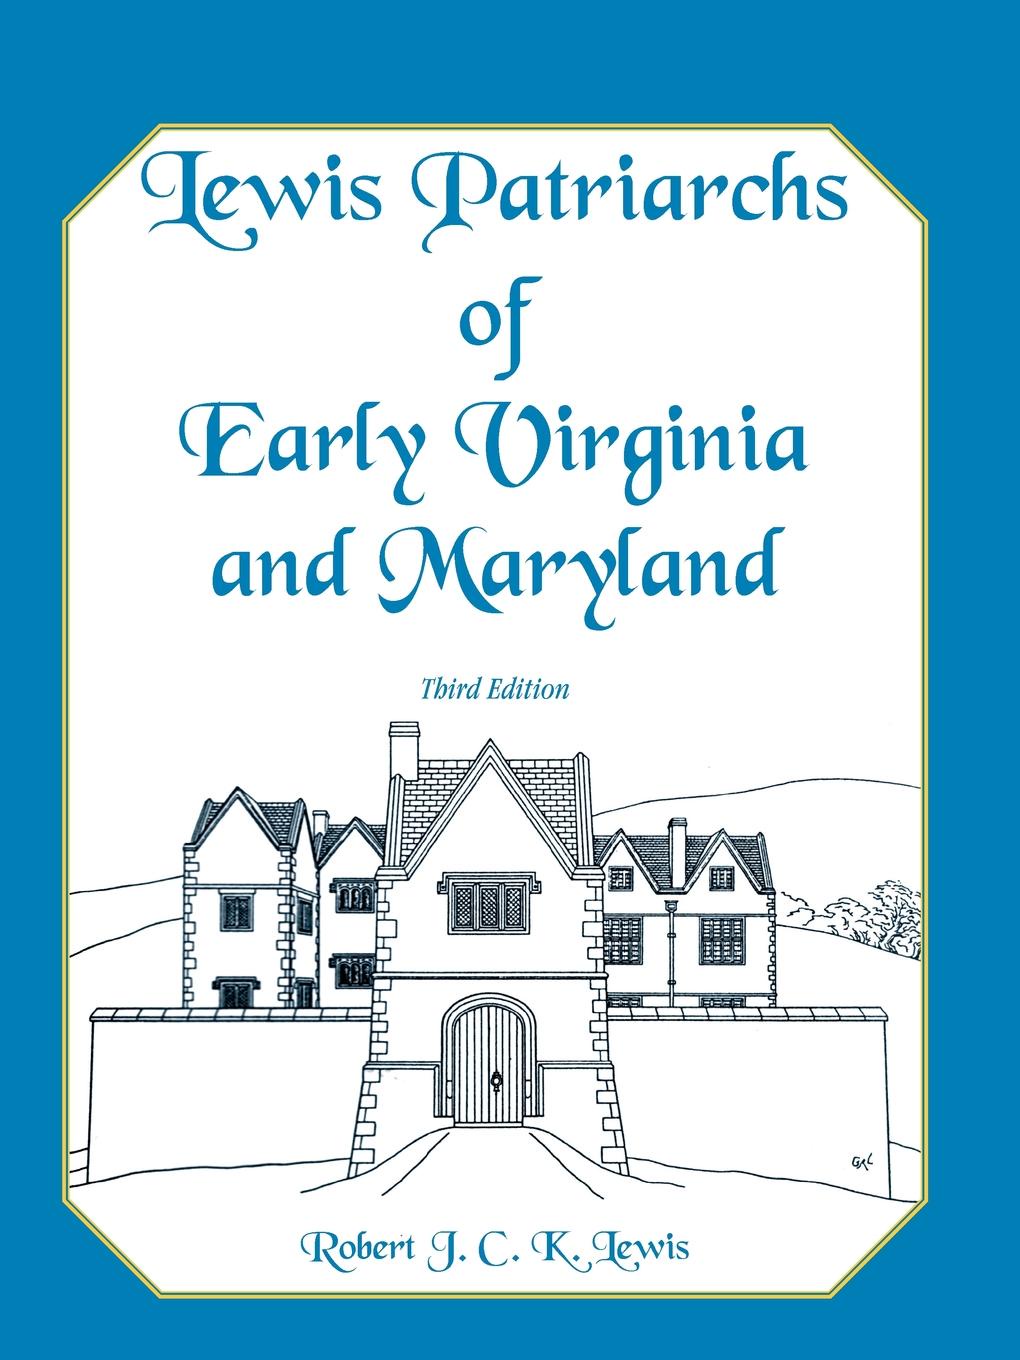 Lewis Patriarchs of Early Virginia and Maryland, Third Edition